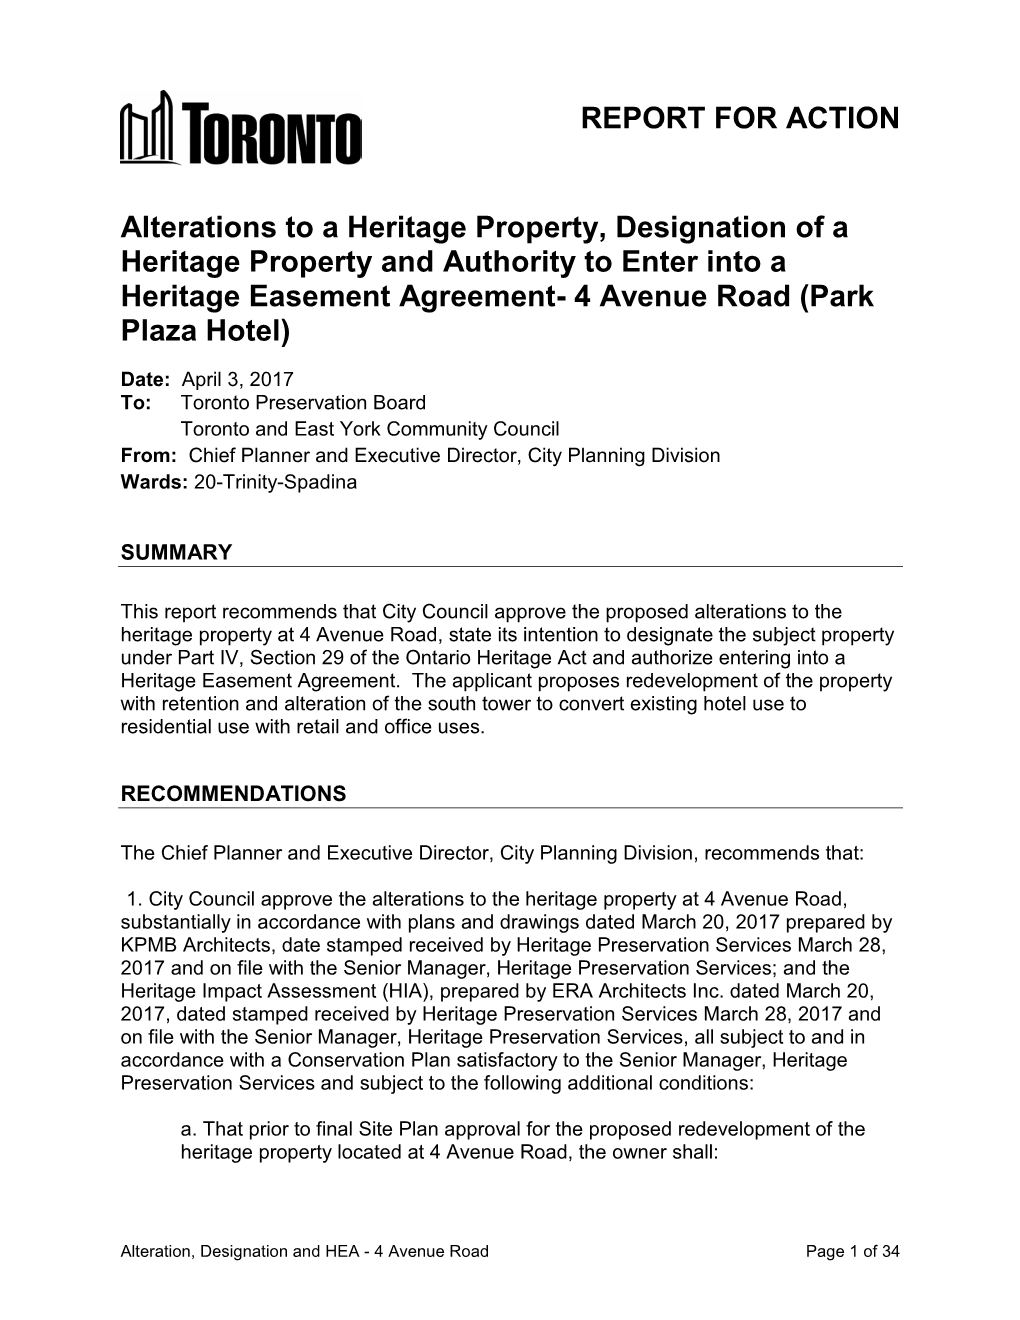 Alterations to a Heritage Property, Designation of a Heritage Property and Authority to Enter Into a Heritage Easement Agreement- 4 Avenue Road (Park Plaza Hotel)